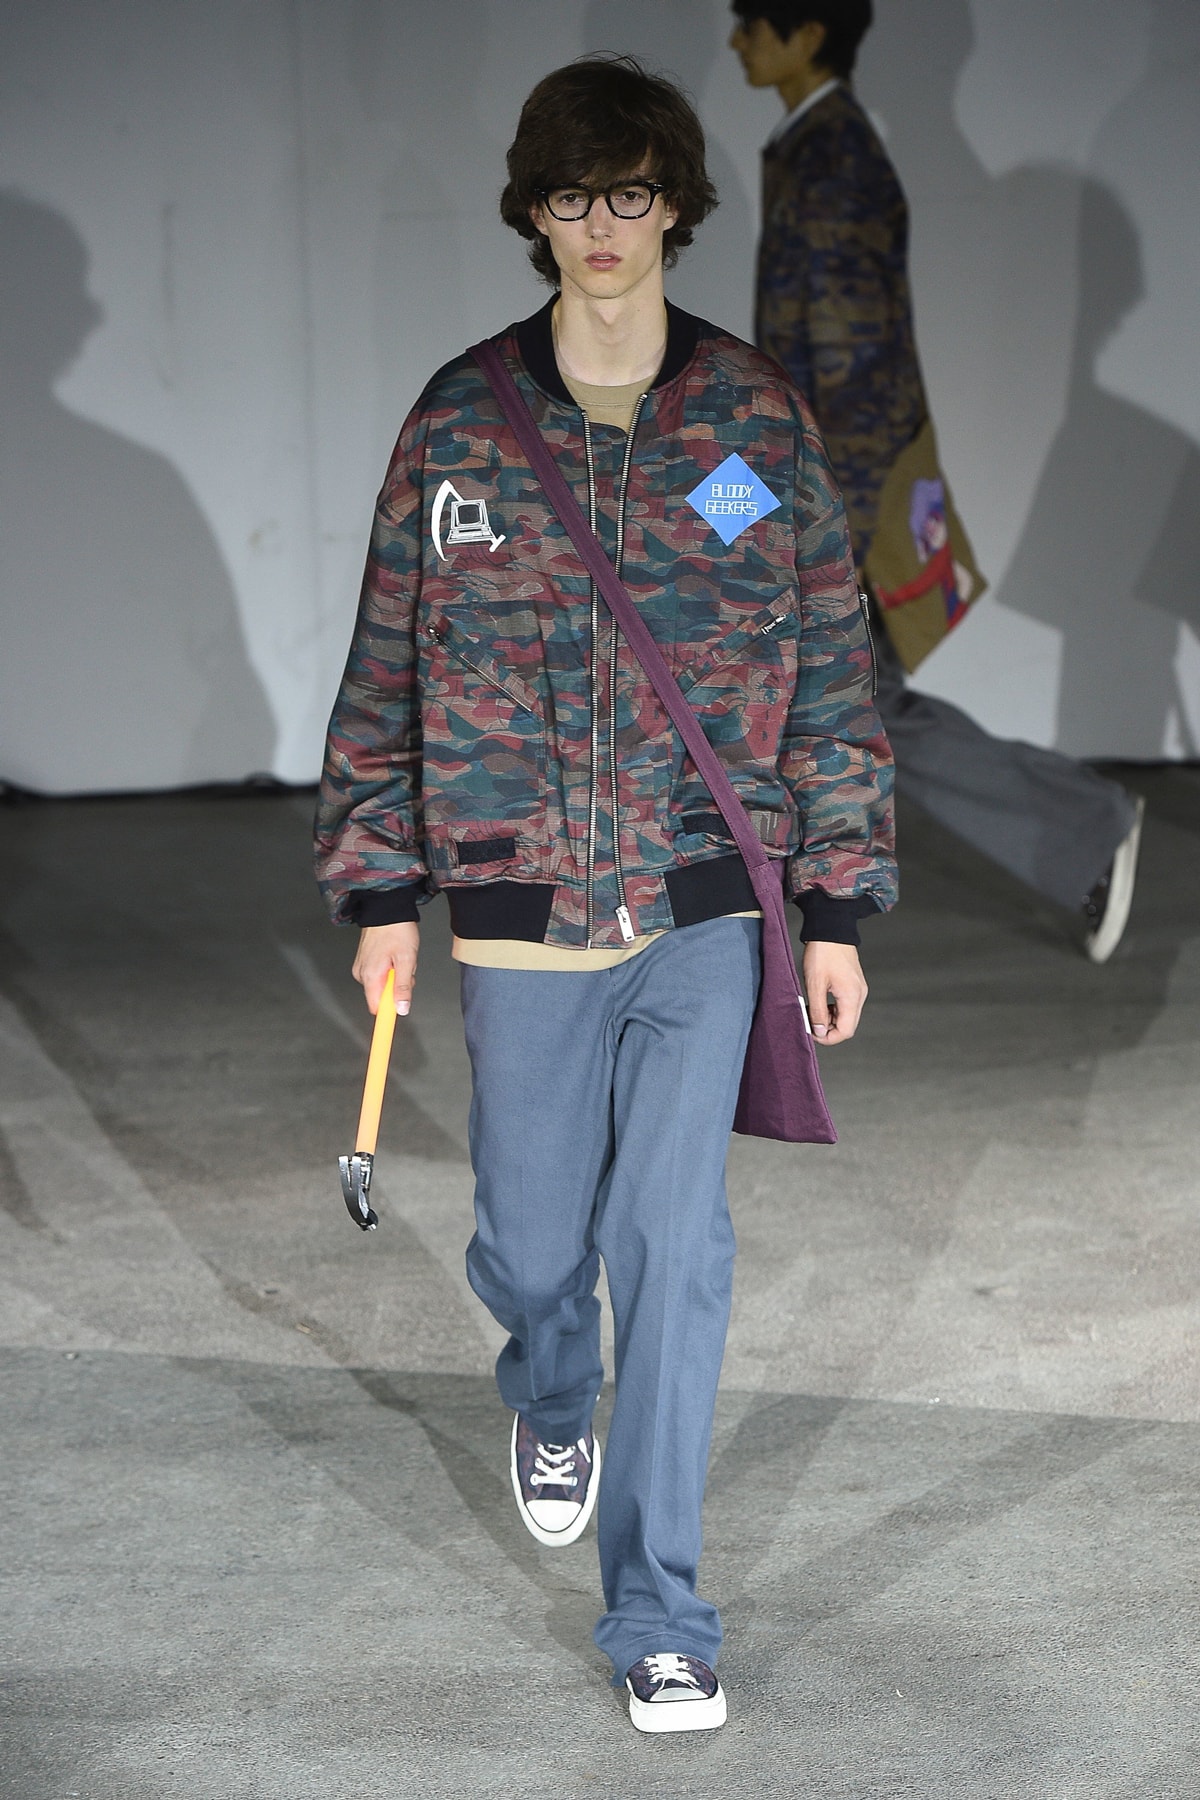 UNDERCOVER Spring Summer 2019 Collection Runway Jun Takahashi Nike Leather Jacket Dr Martens Riot Punk Gangs The New warriors